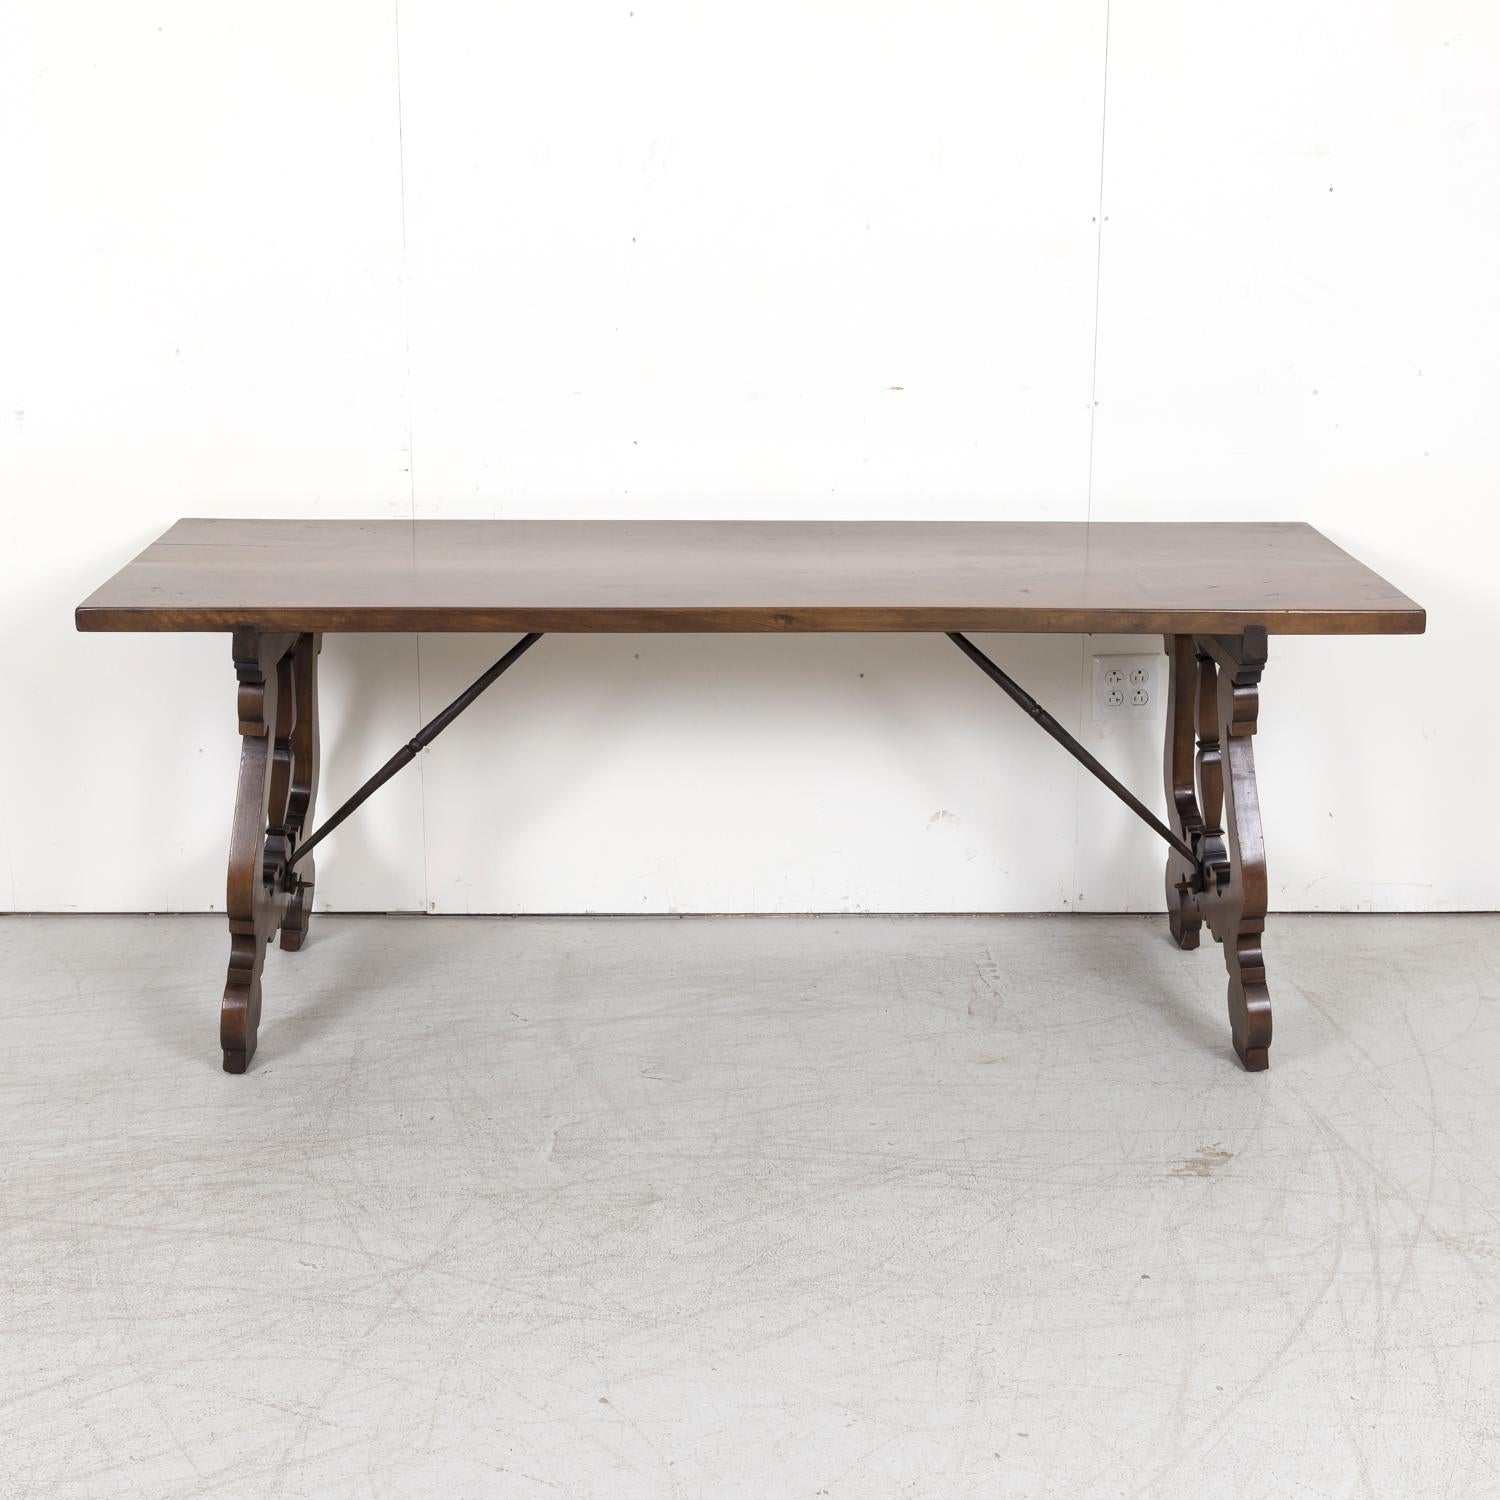 Hand-Carved 19th Century Spanish Baroque Style Walnut Trestle Dining Table with Iron Stretch